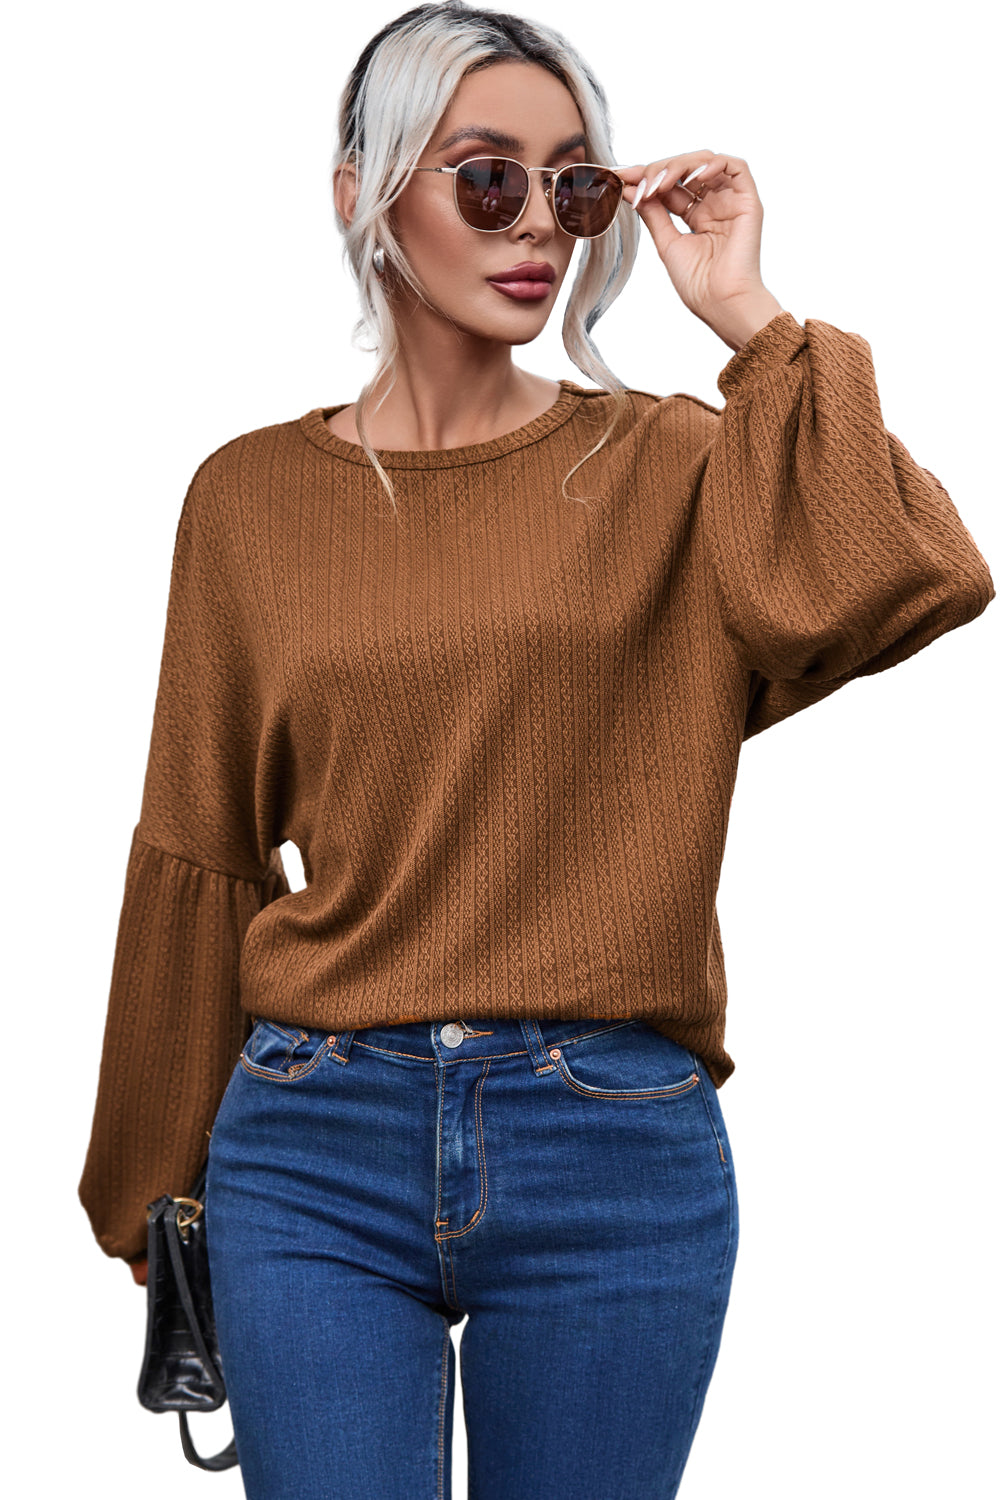 Faux Knit Jacquard Puffy Long Sleeve Top